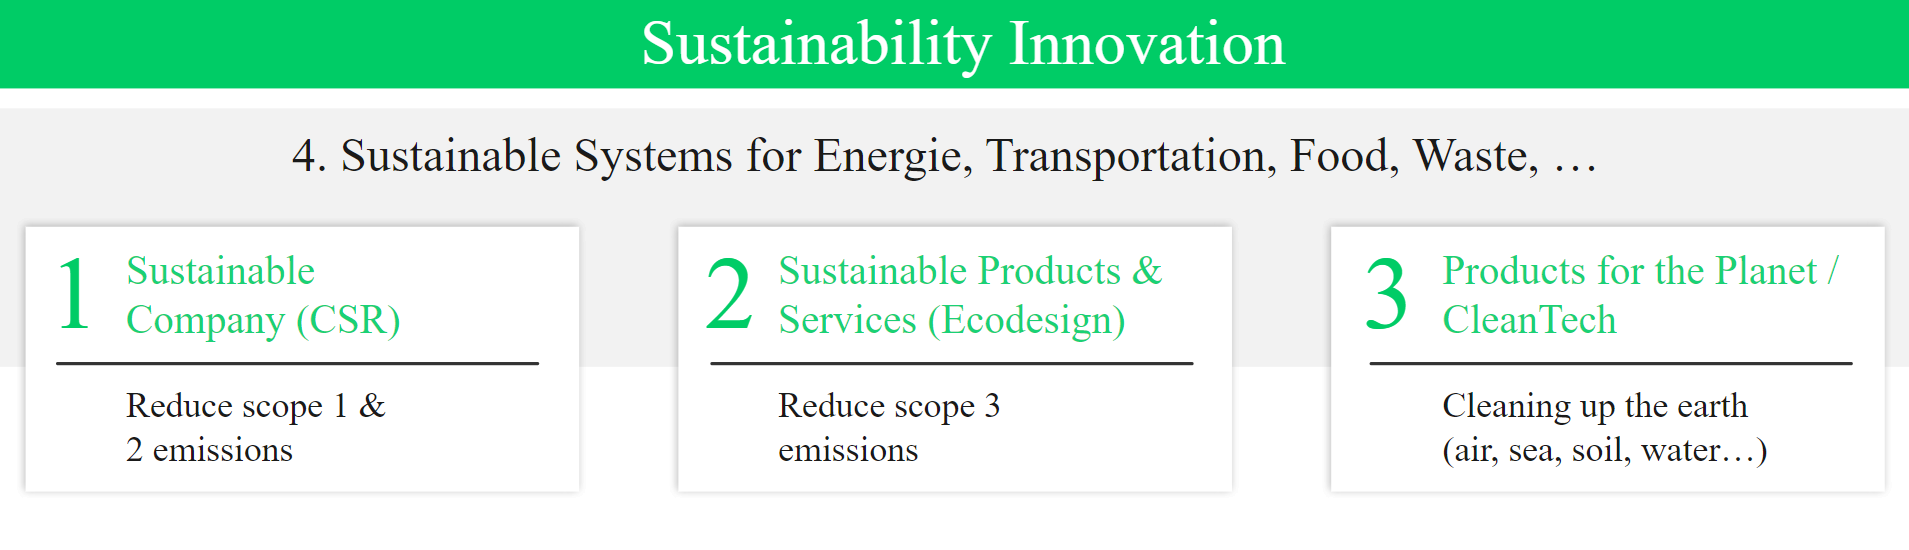 sustainable-company-products-services-planet-cleantech